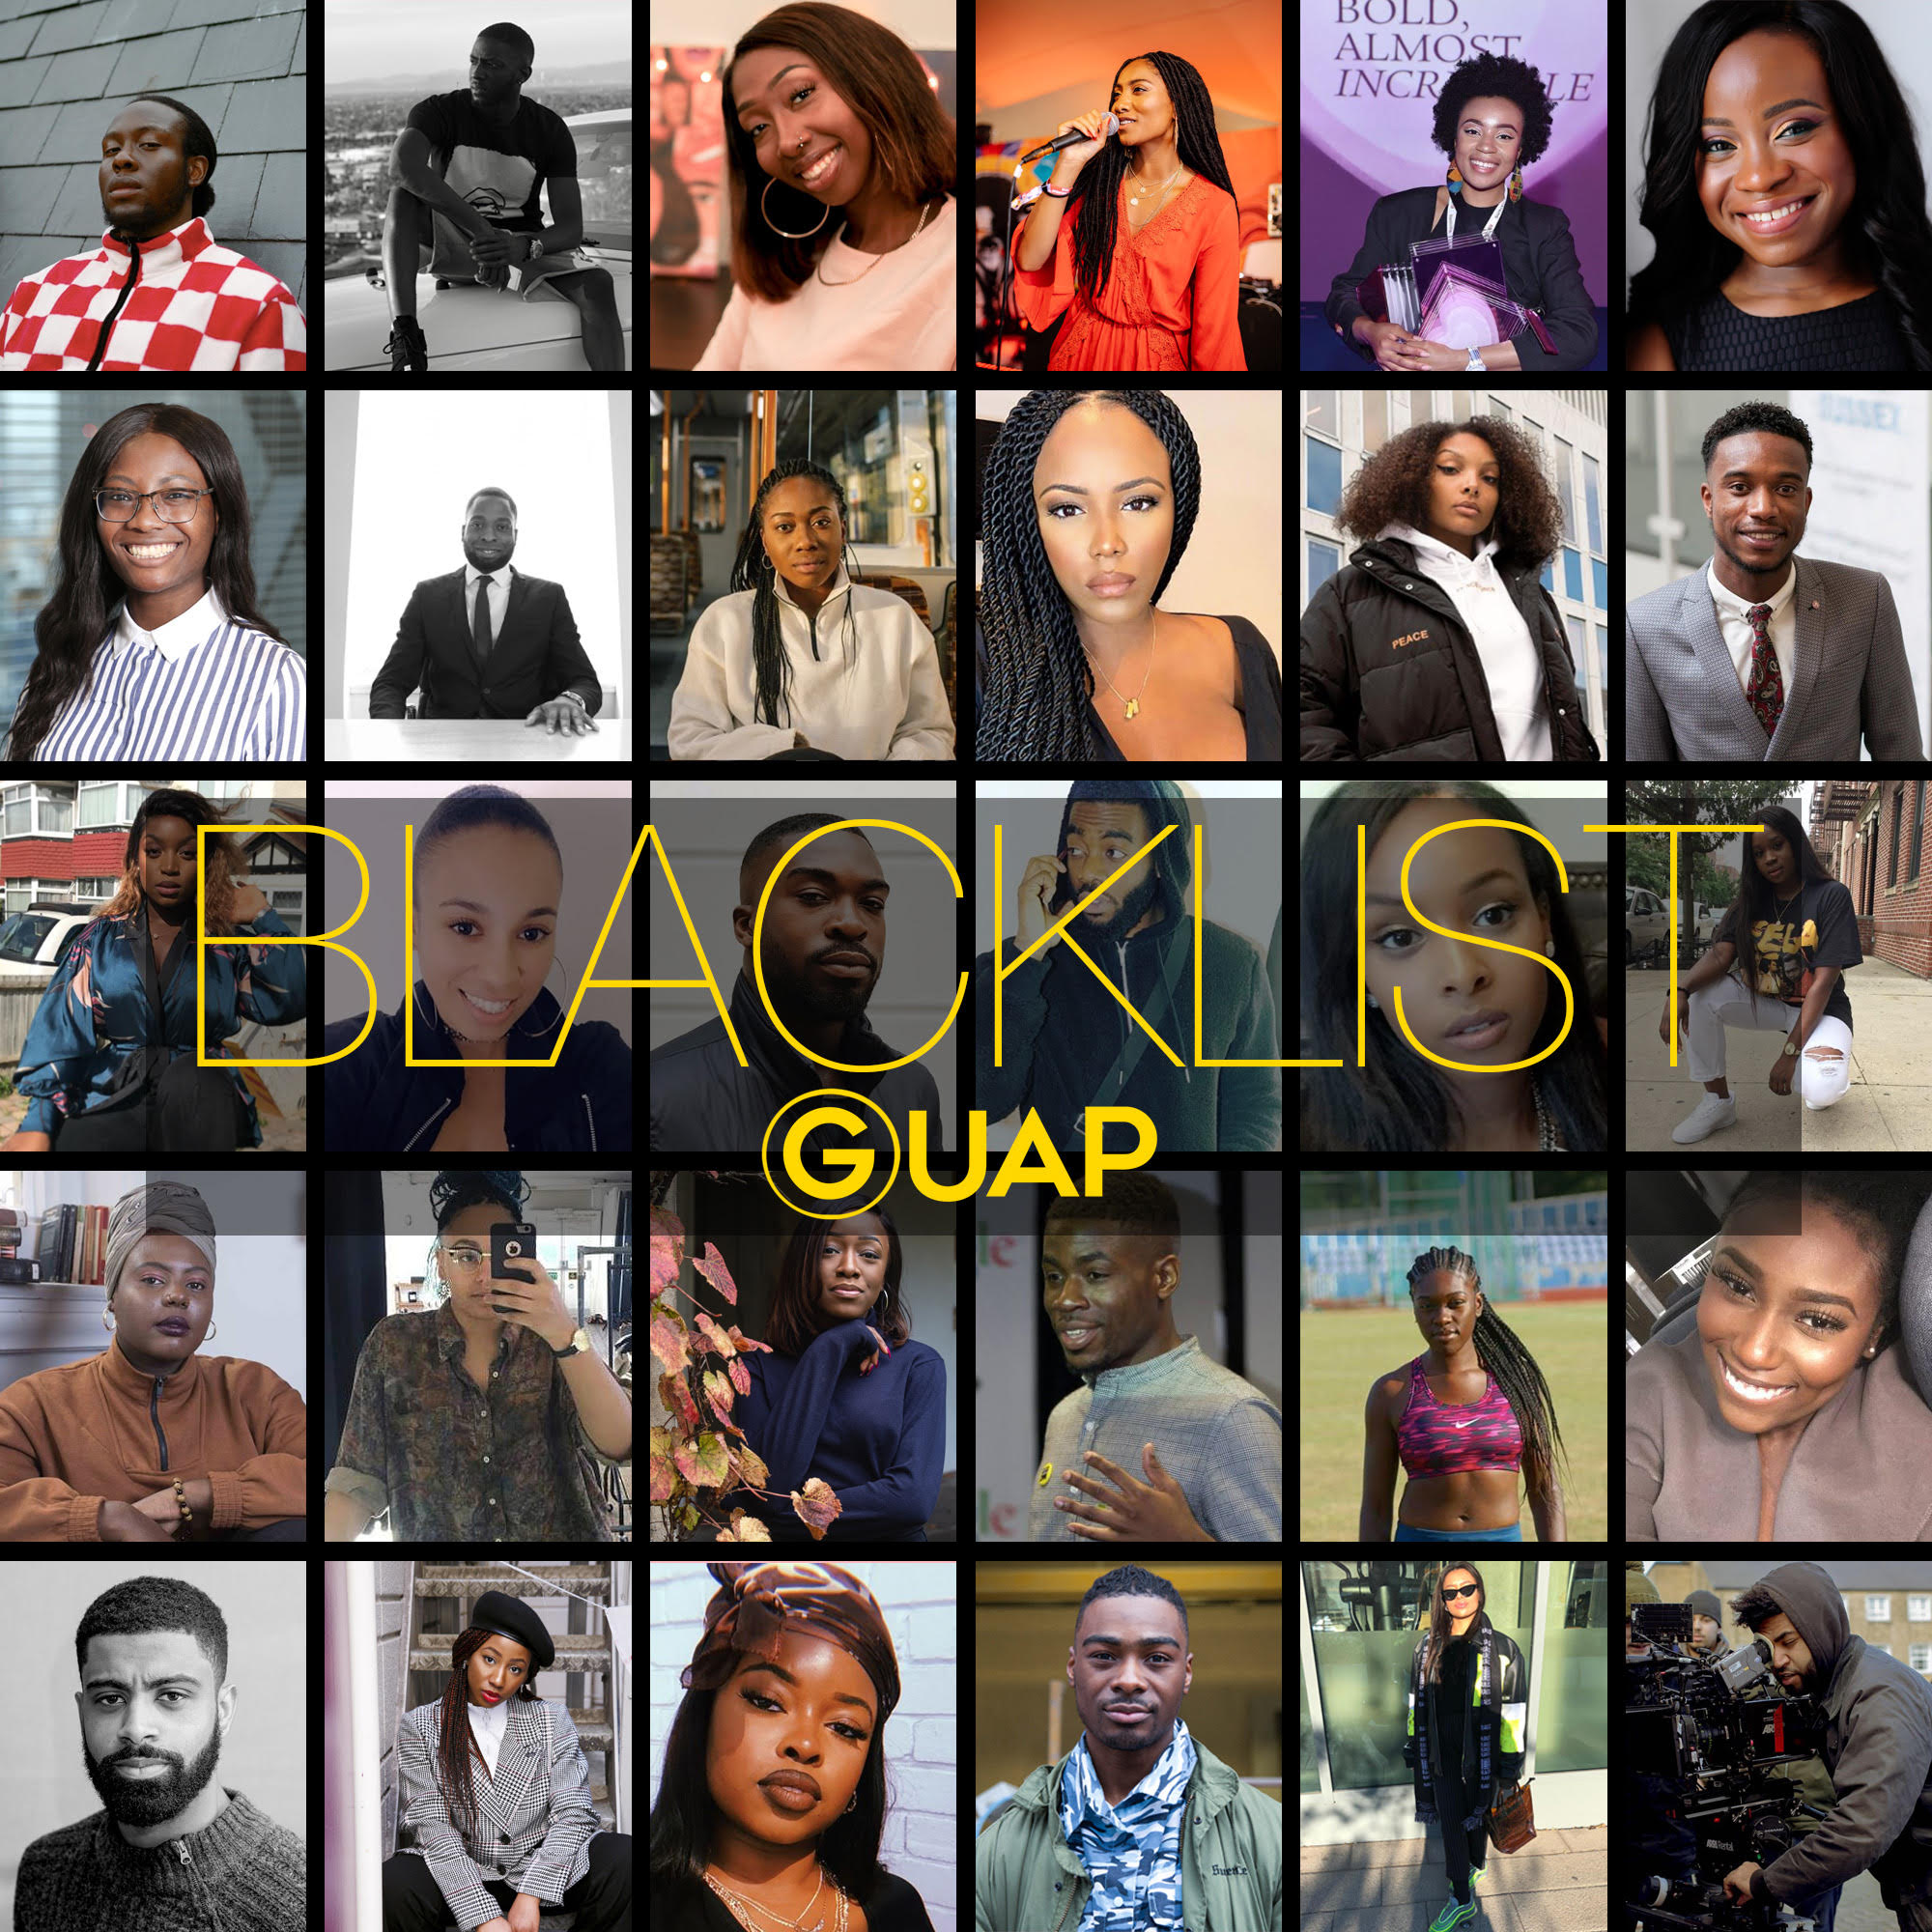 Meet the 30 under 30 Black professionals and creatives you need to know #TheBlackList2018